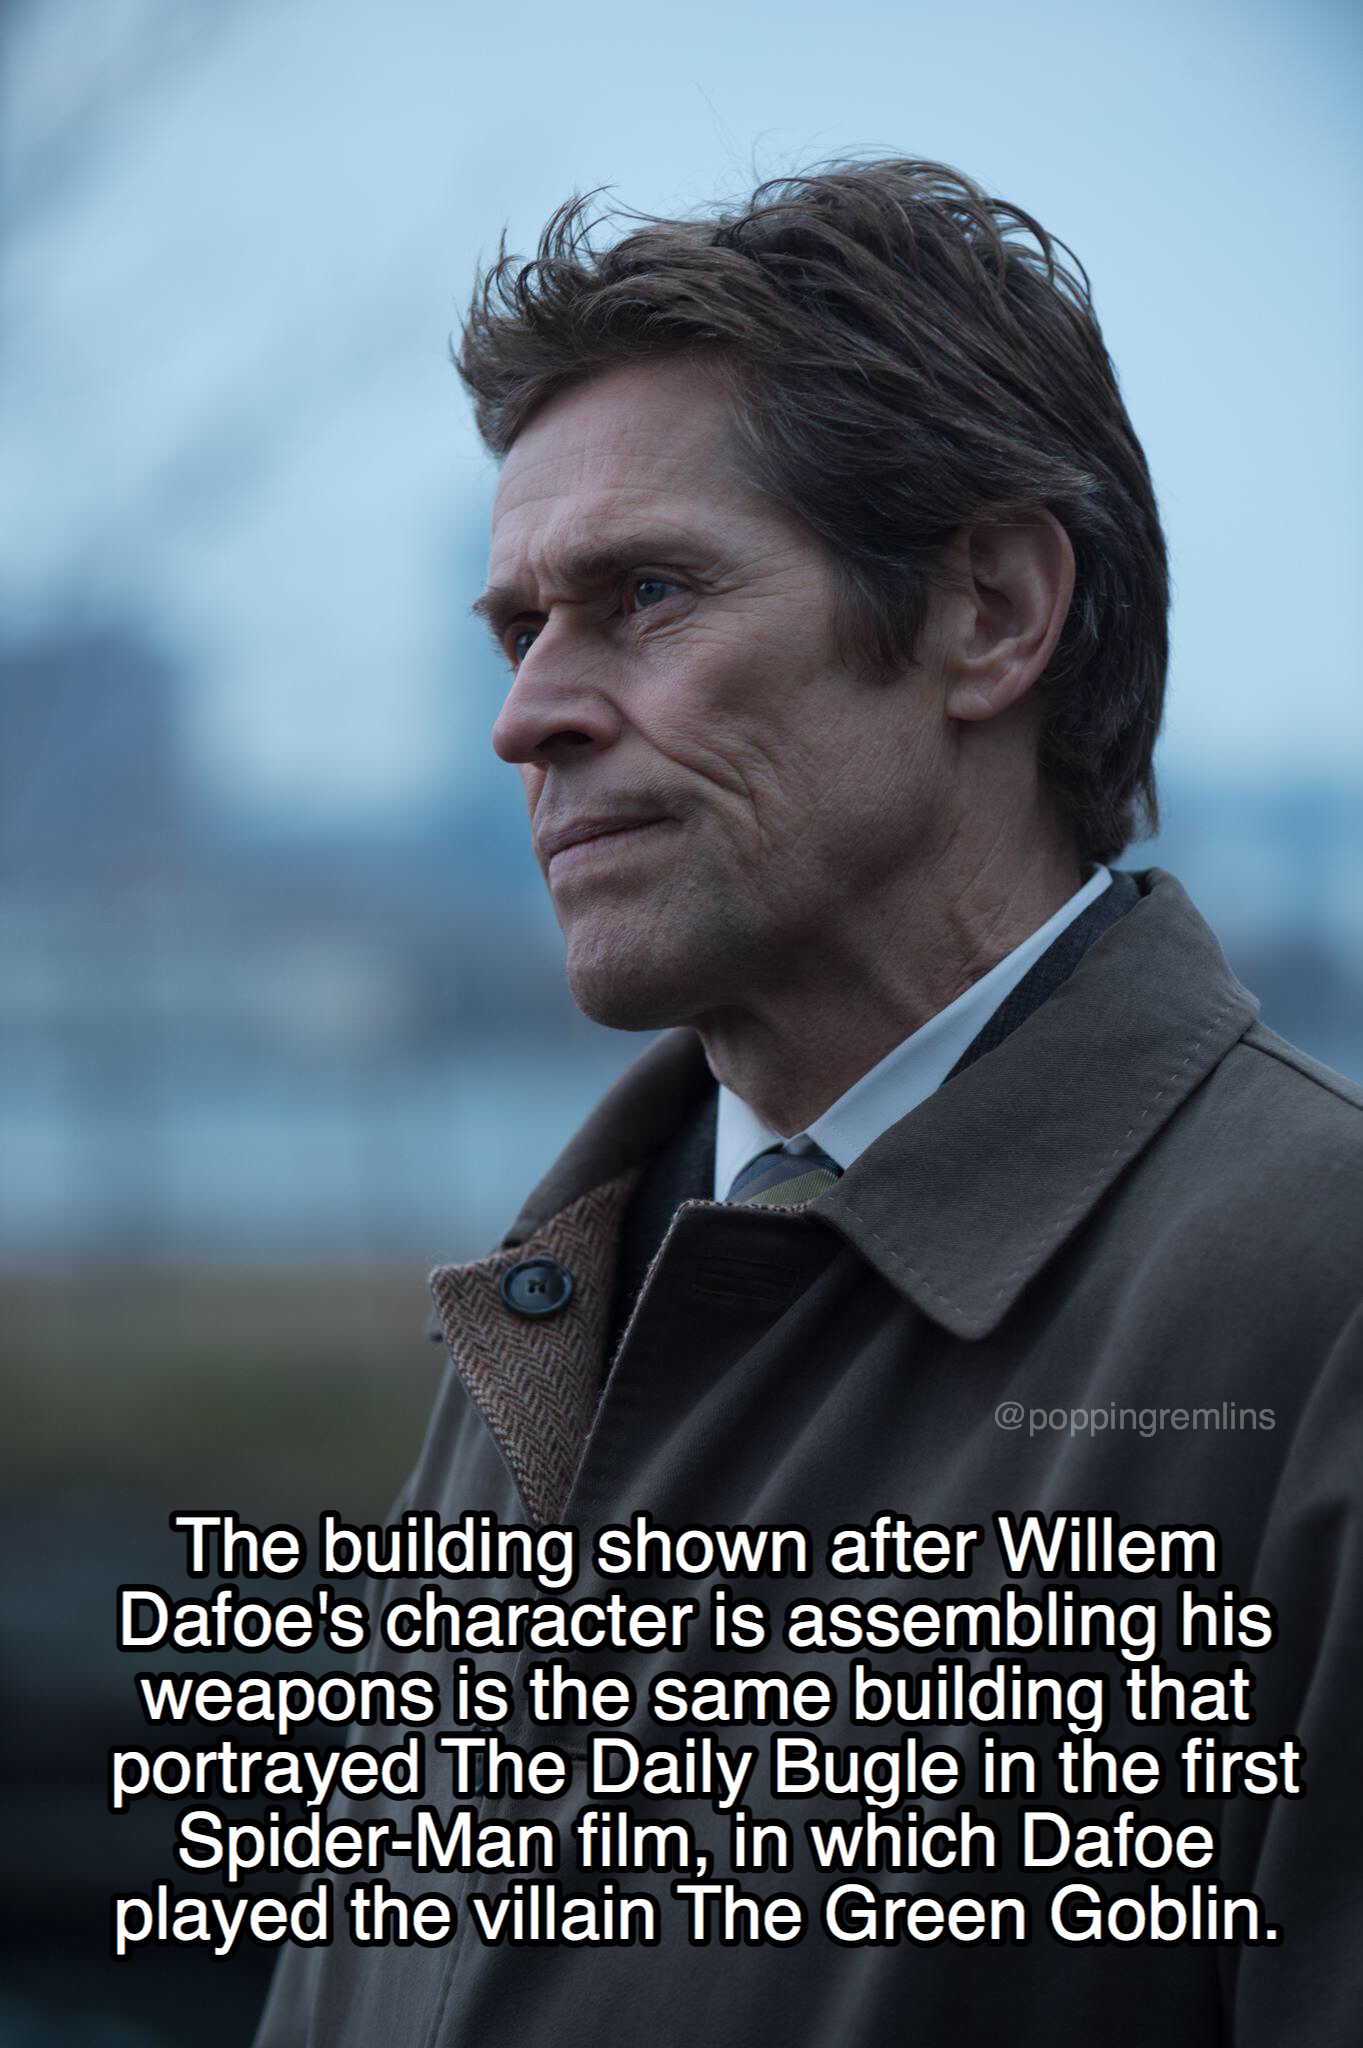 john wick facts - de poppingremlins The building shown after Willem Dafoe's character is assembling his weapons is the same building that portrayed The Daily Bugle in the first SpiderMan film, in which Dafoe played the villain The Green Goblin.